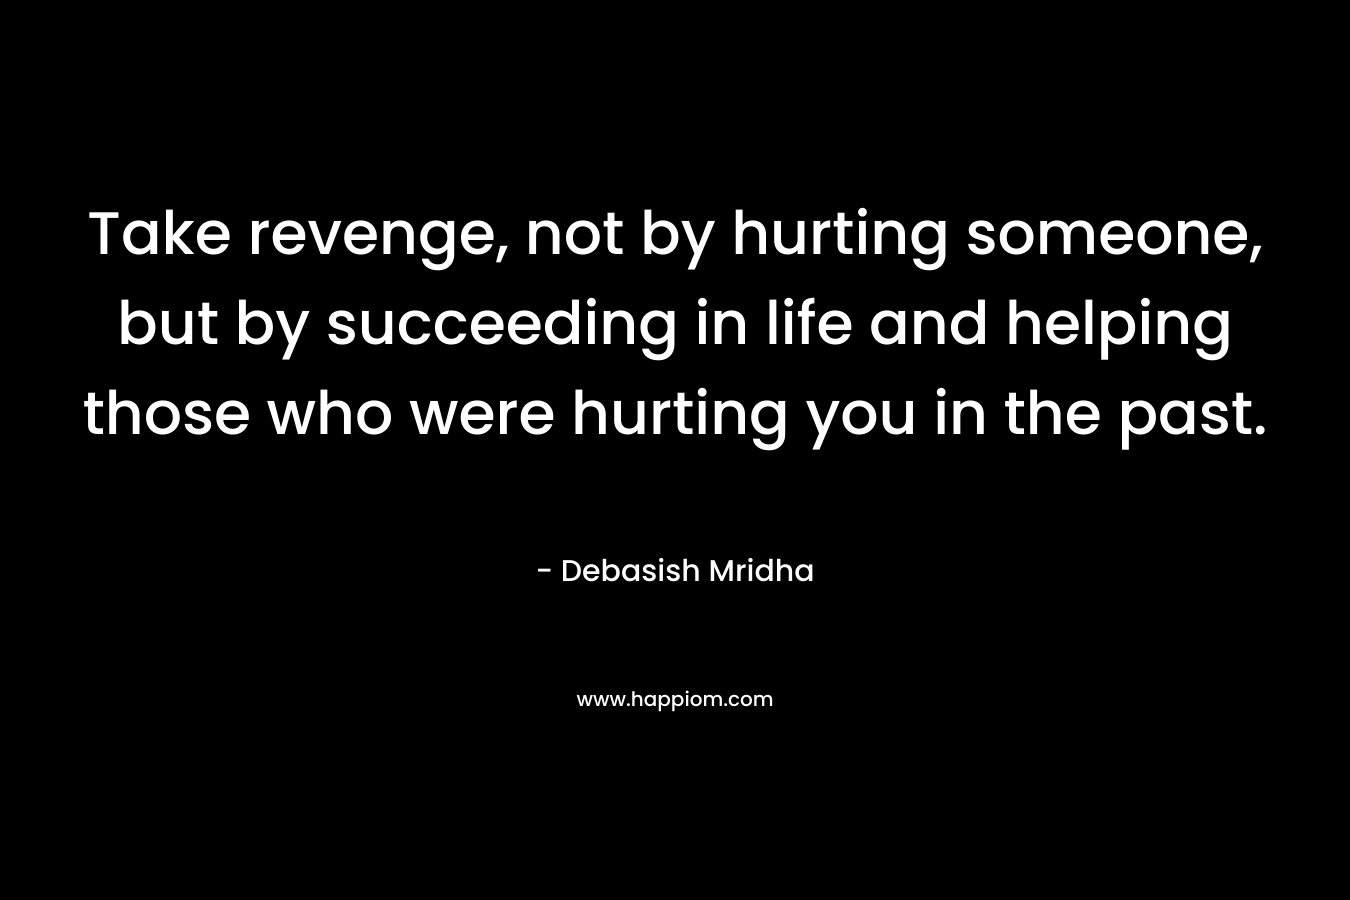 Take revenge, not by hurting someone, but by succeeding in life and helping those who were hurting you in the past. – Debasish Mridha